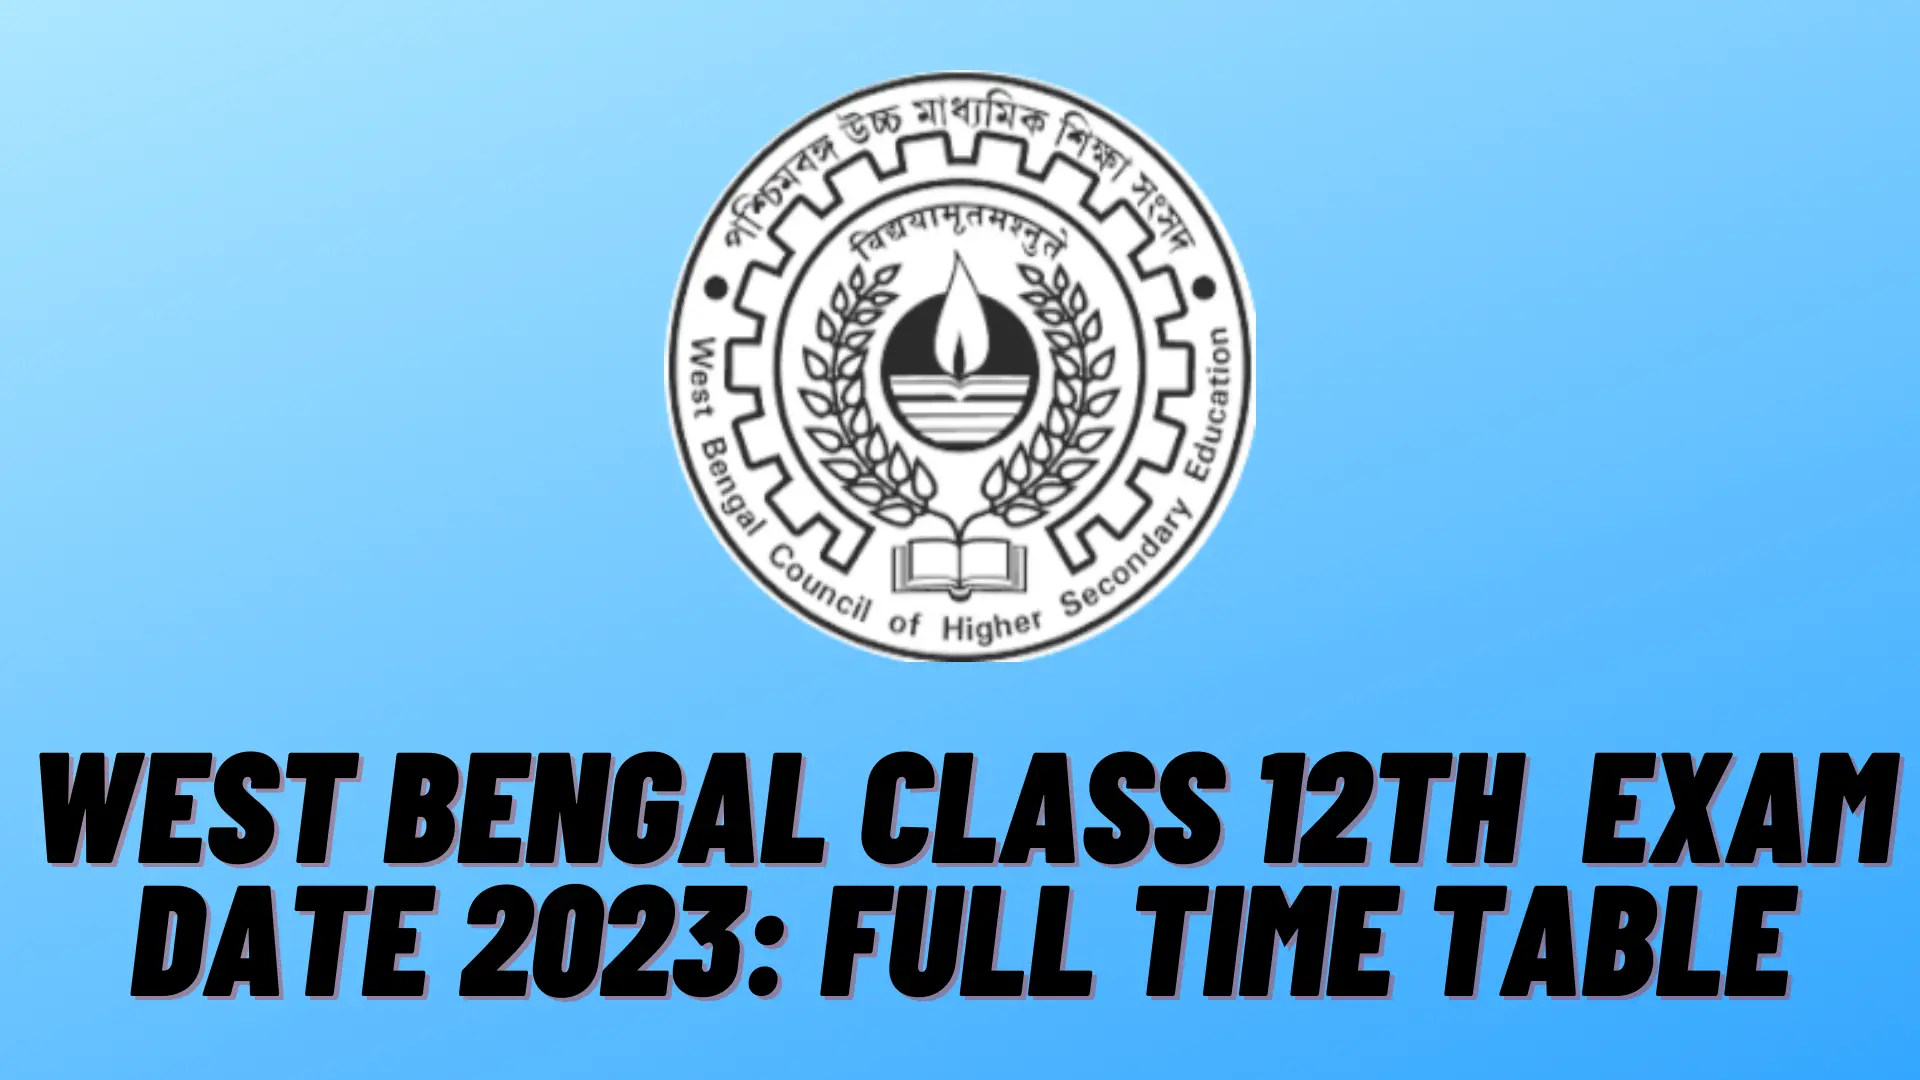 West Bengal Class 12th  Exam Date 2023: Full Time Table